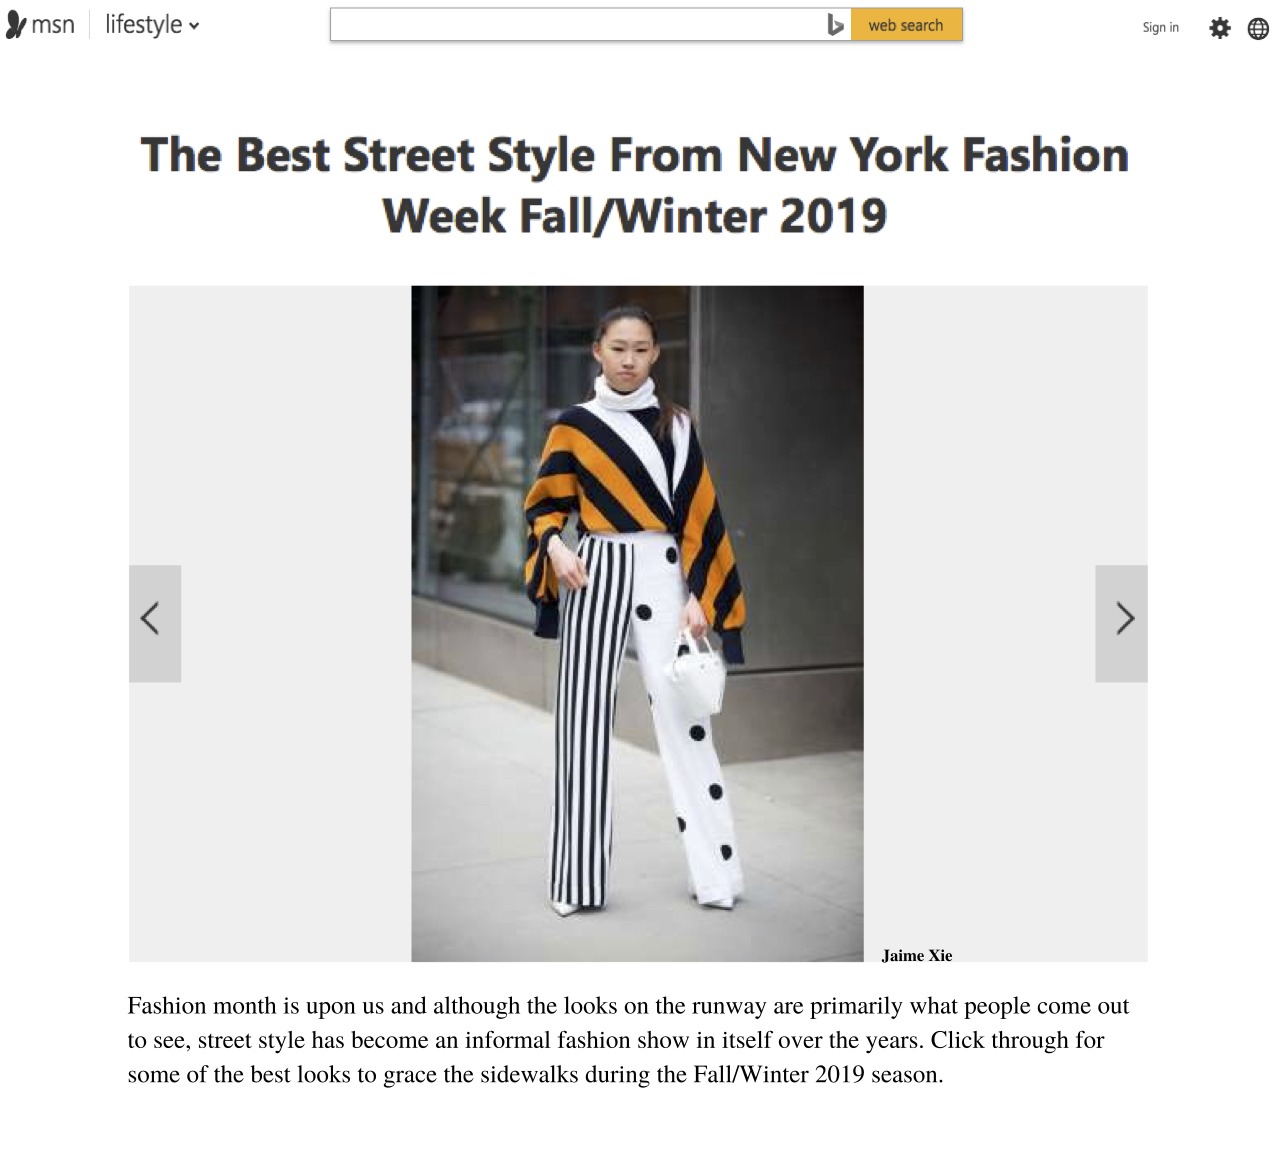 MSN: The Best Street Style From New York Fashion Week Fall/Winter 2019